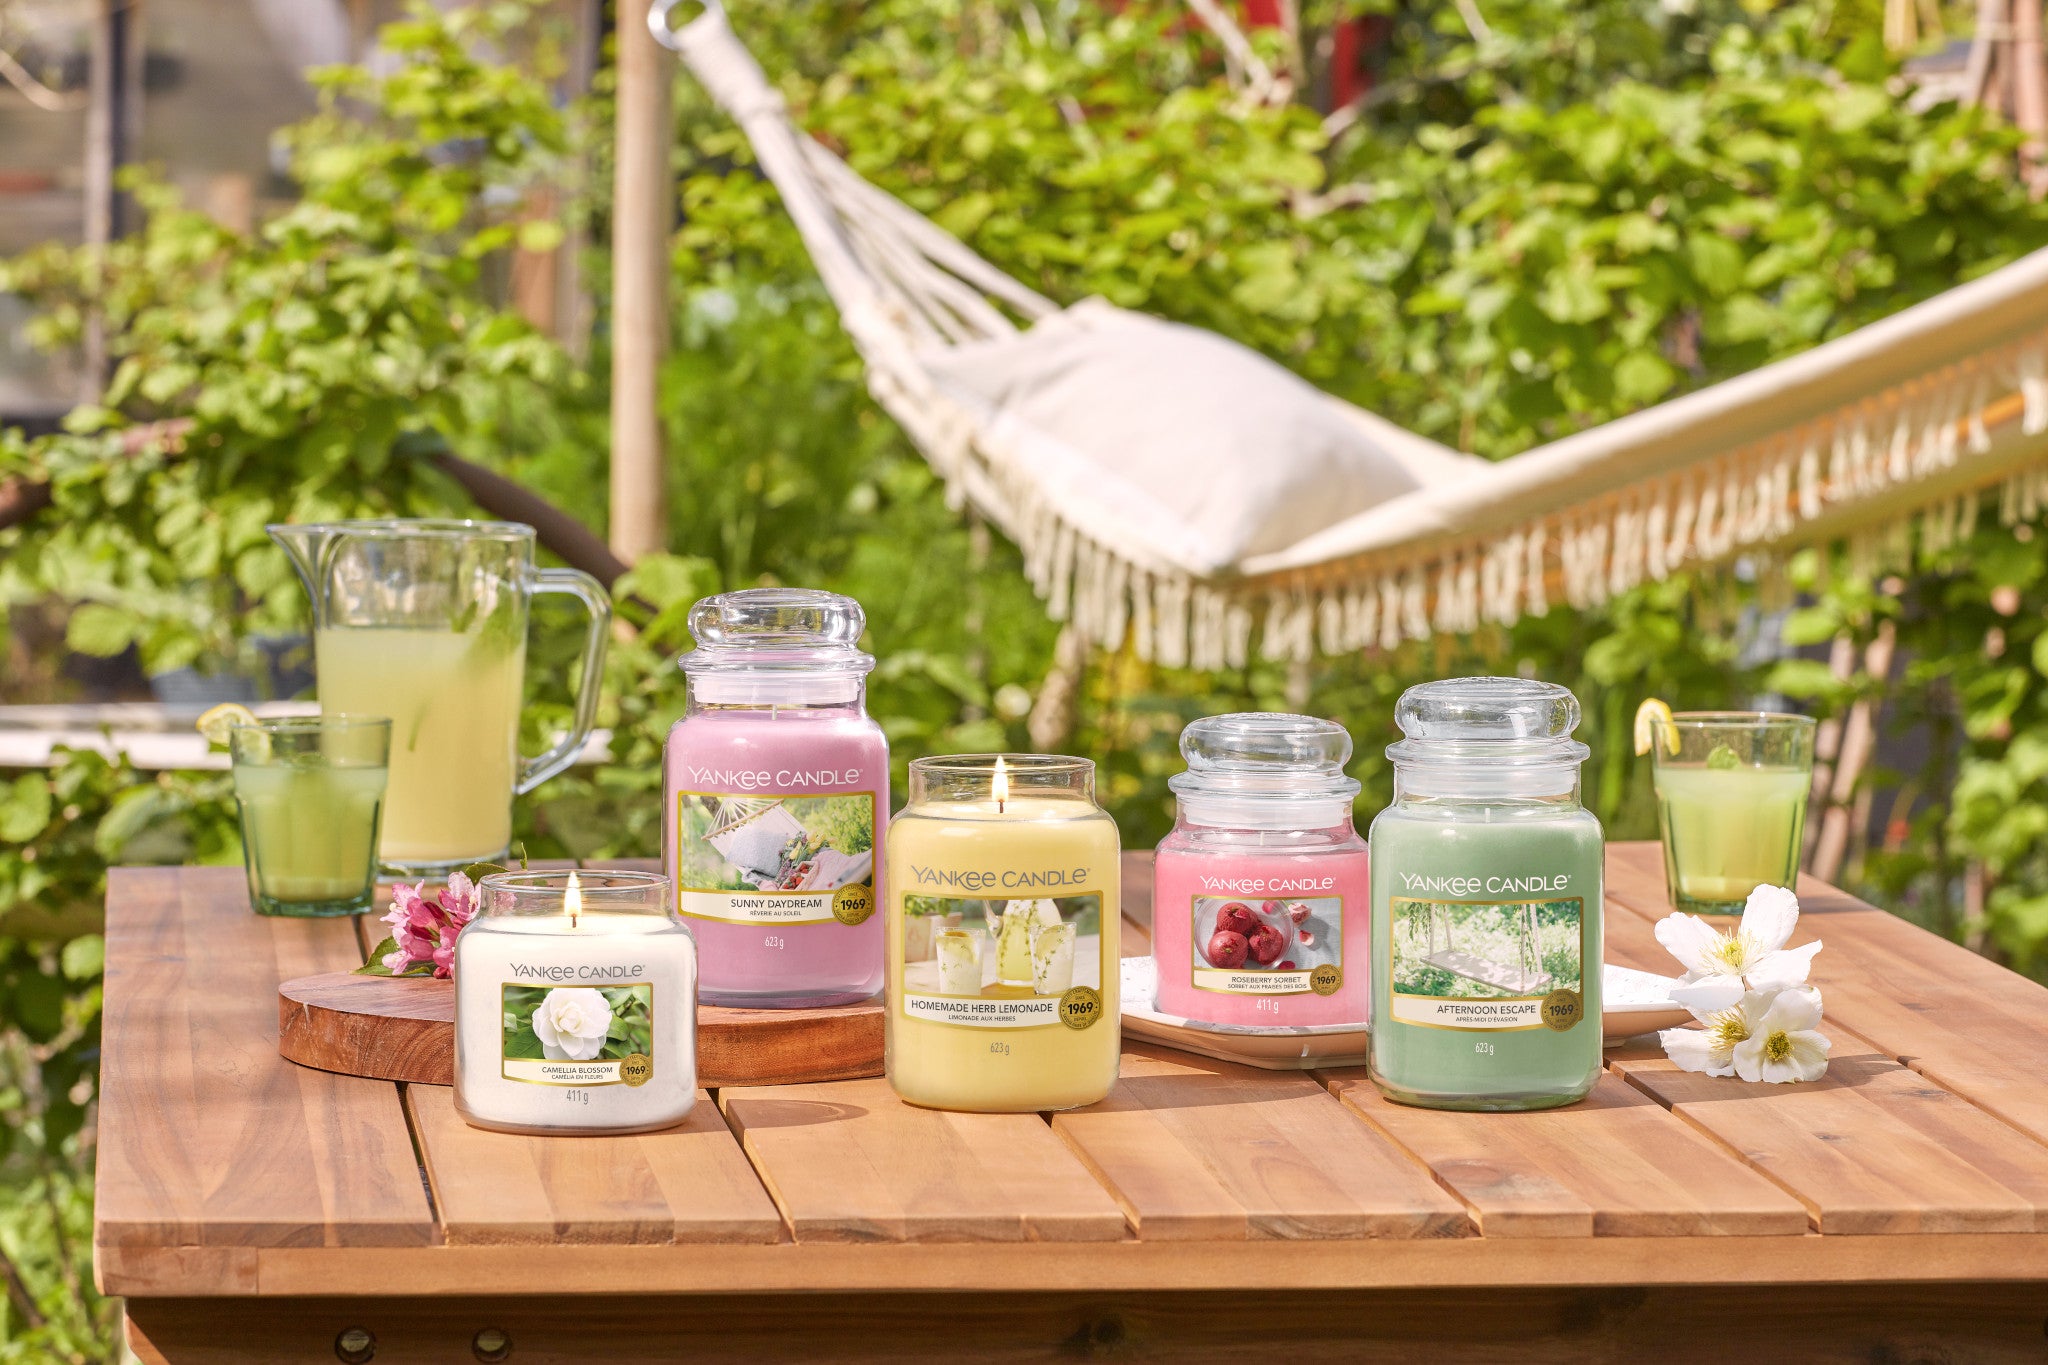 AFTERNOON ESCAPE -Yankee Candle- Giara Grande